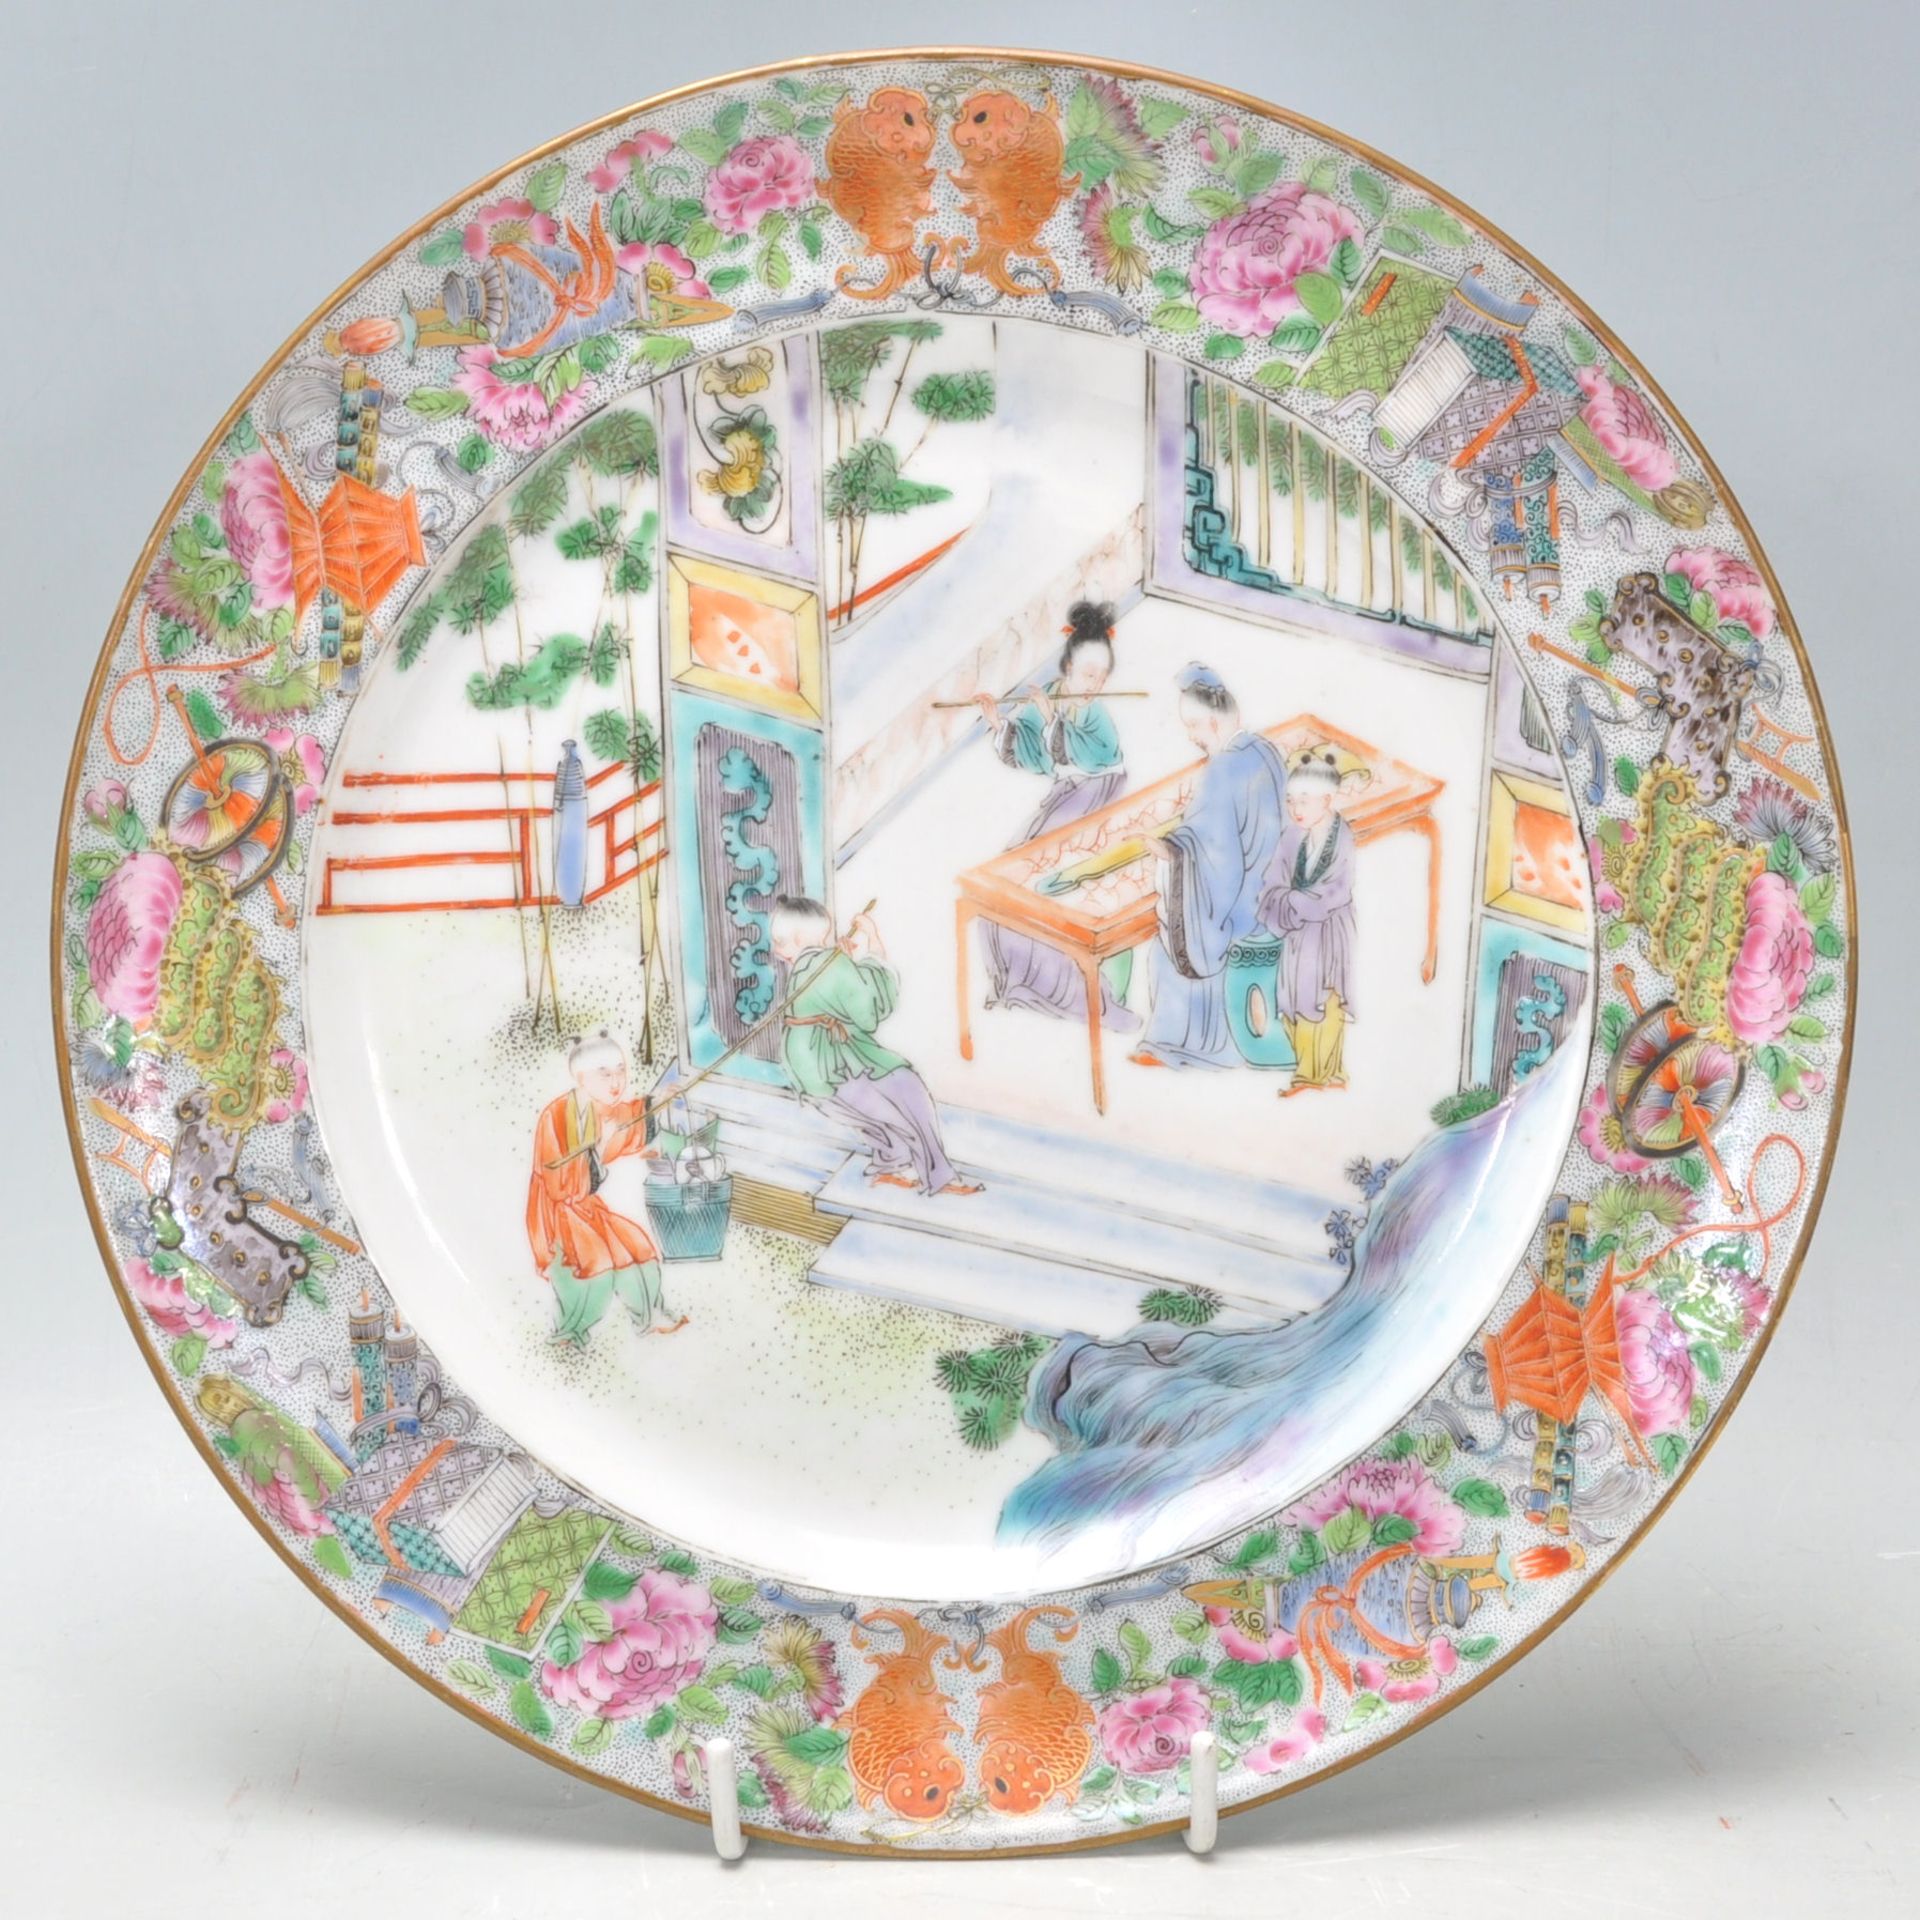 An 18th century Chinese antique porcelain plate depicting a scene of an elder inspecting a sword